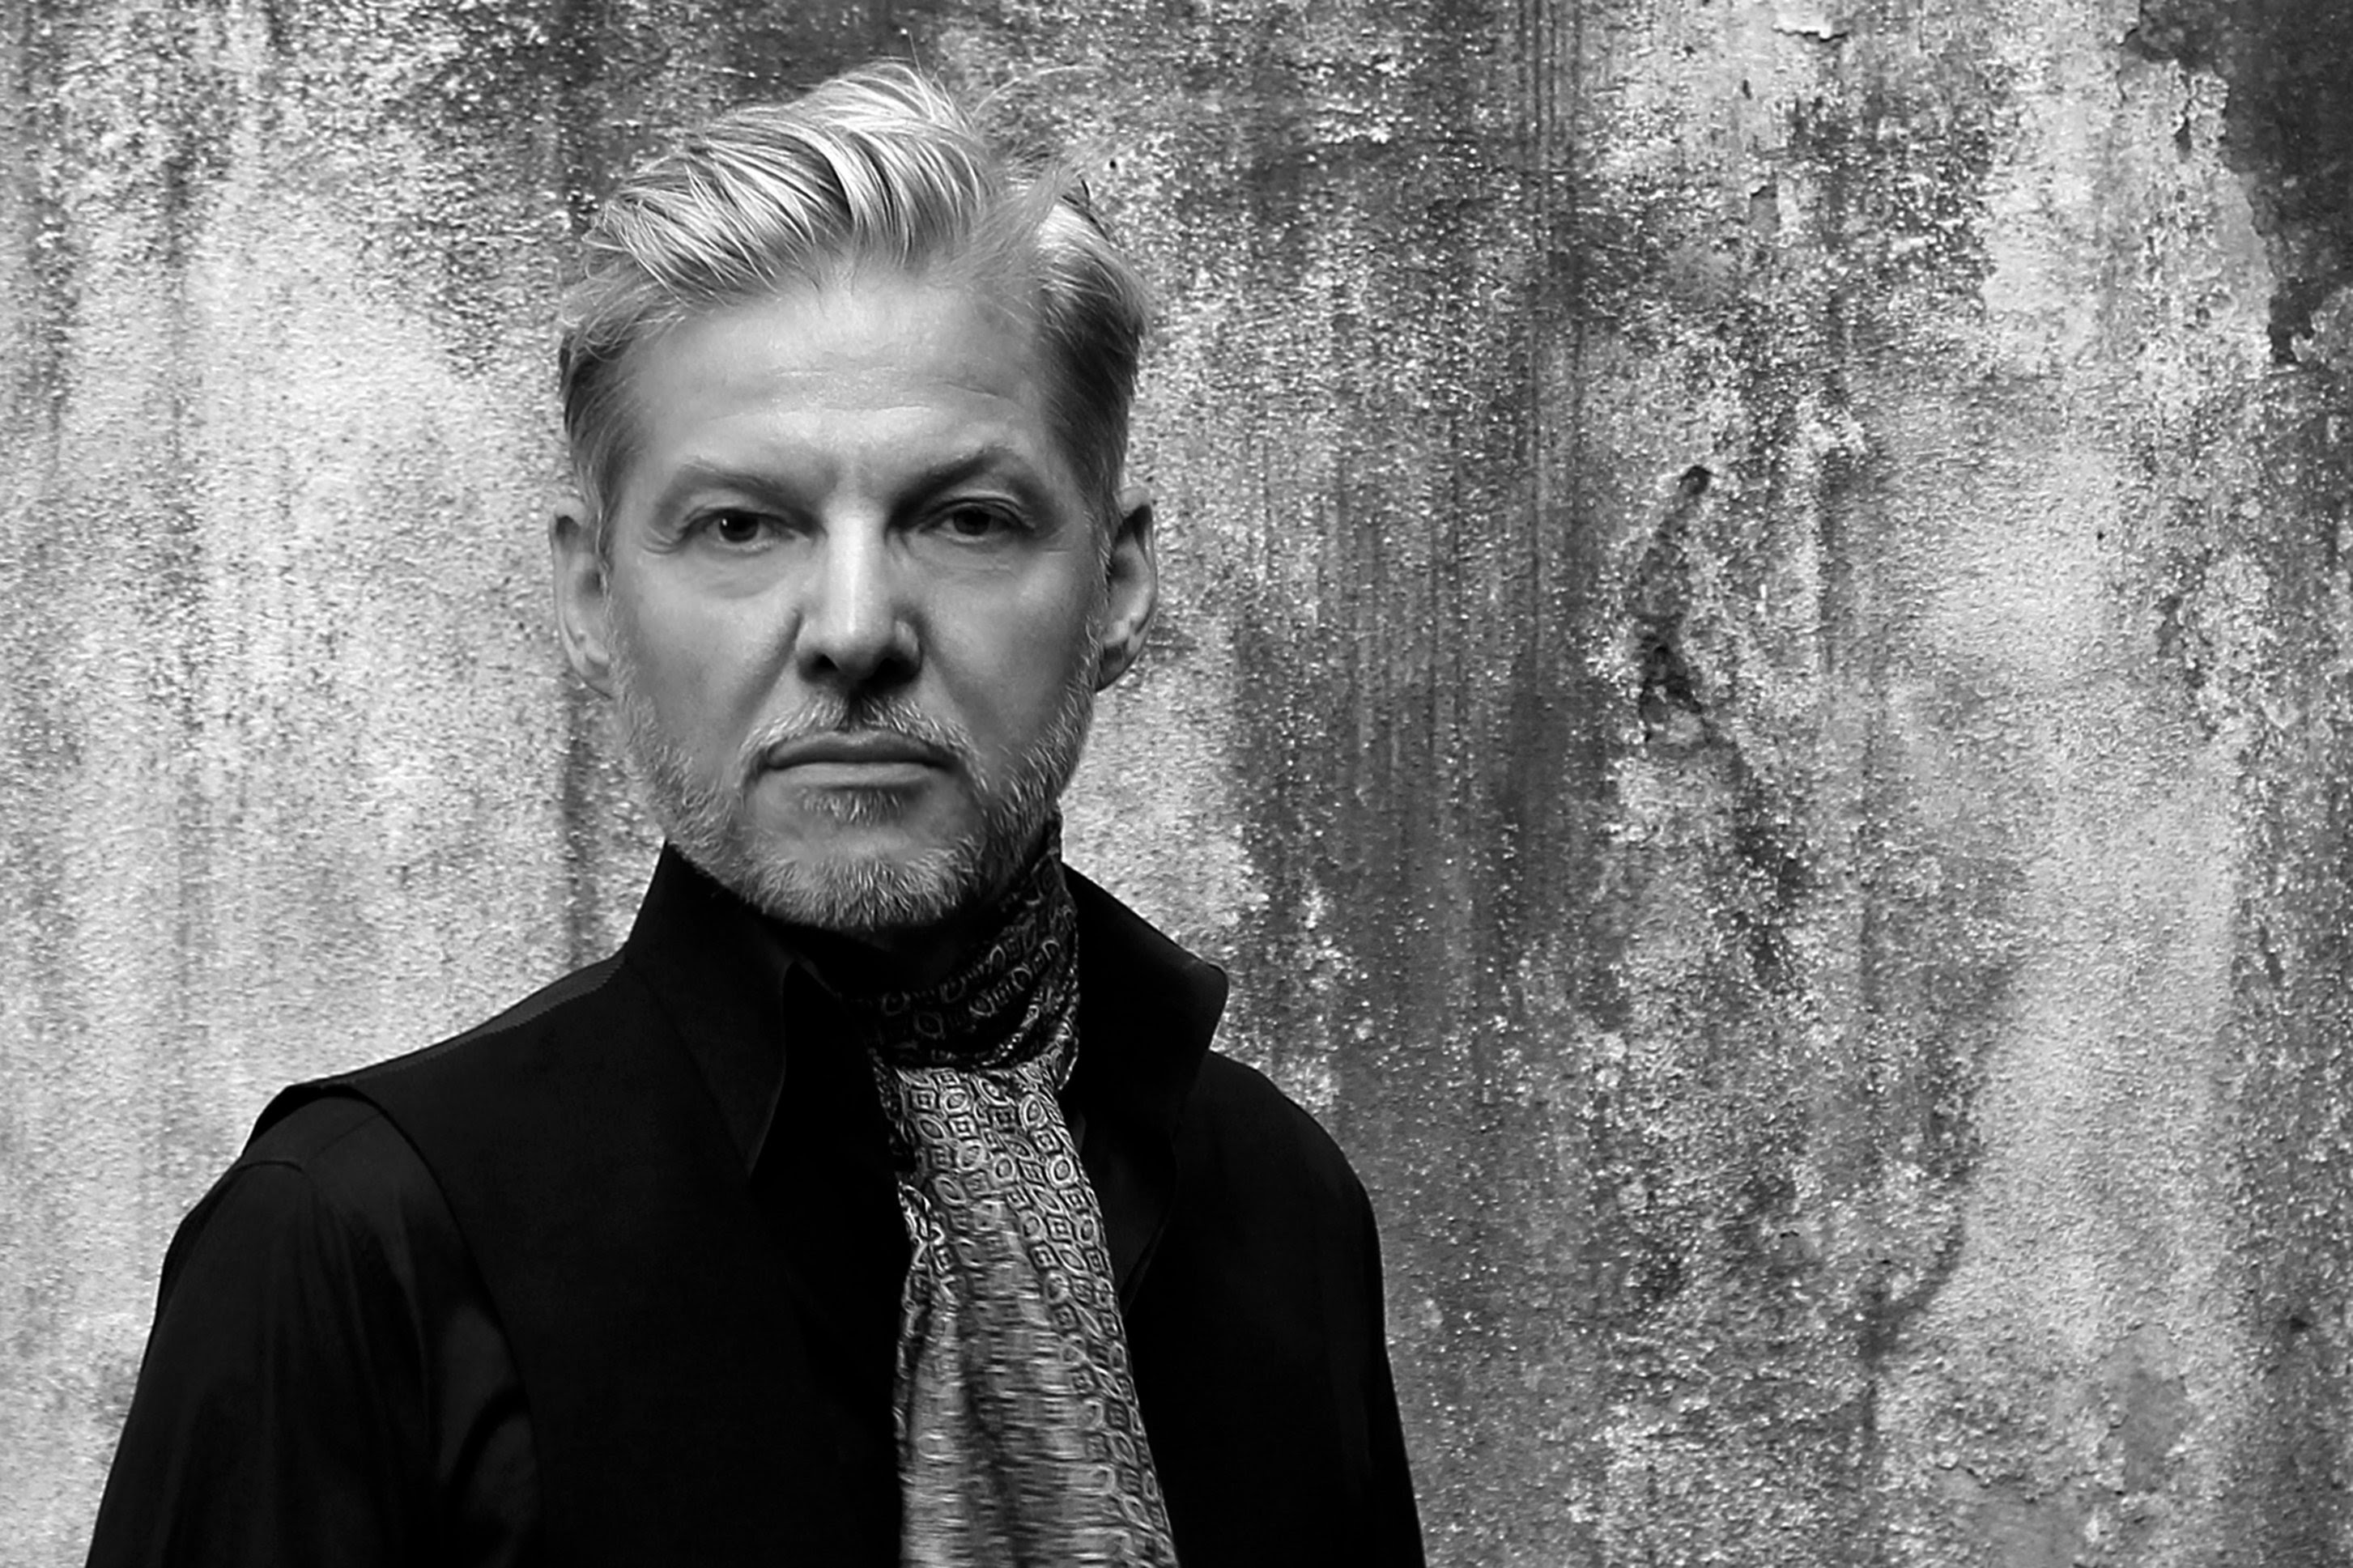 Review: On <i>Narkopop</i>, Wolfgang Voigt's Gas Has Never Sounded More Vividly Ominous